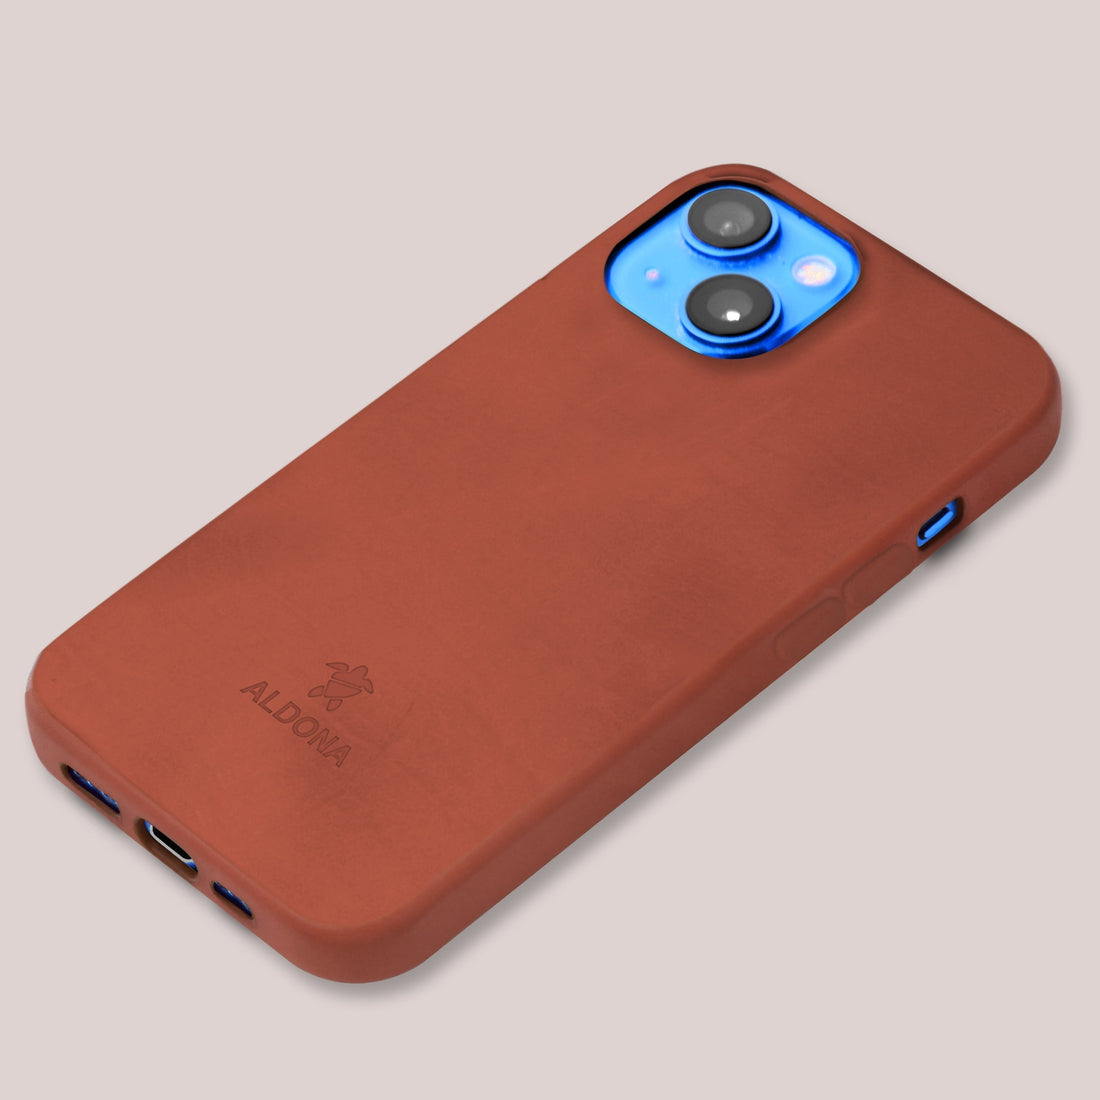 Kalon Case for iPhone 14 Pro Max with MagSafe Compatibility - Burnt Tobacco